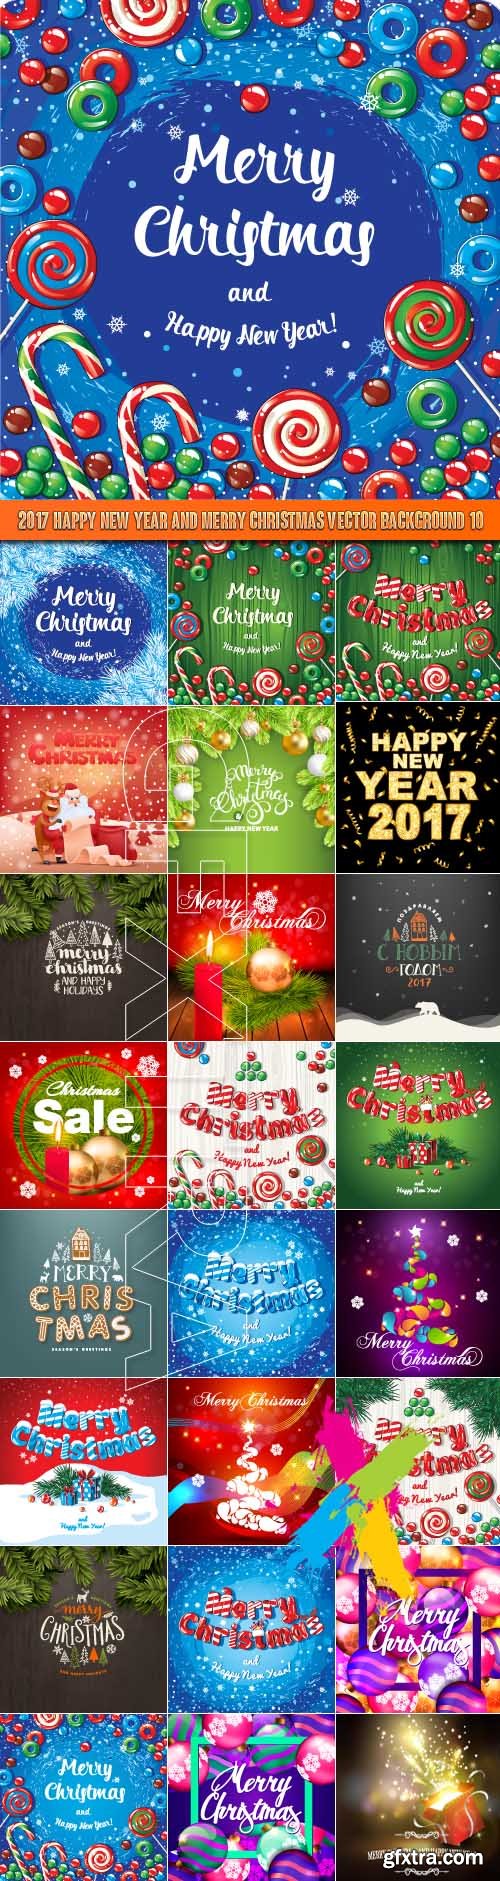 2017 Happy New Year and Merry Christmas vector background 10